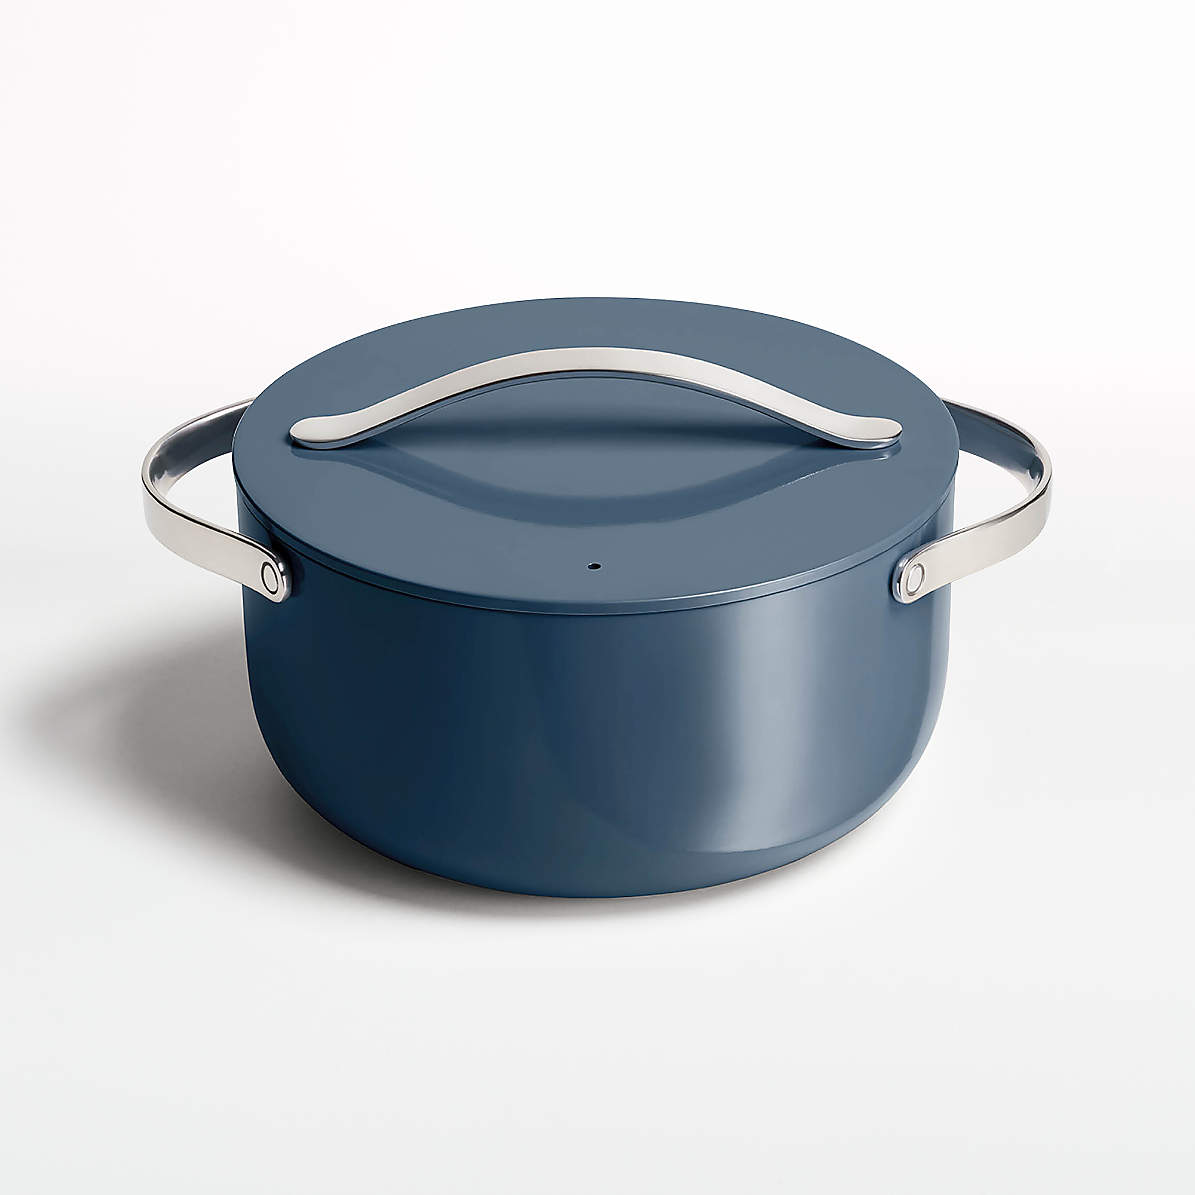 Caraway Non-Toxic and Non-Stick Cookware Set in Navy – Premium